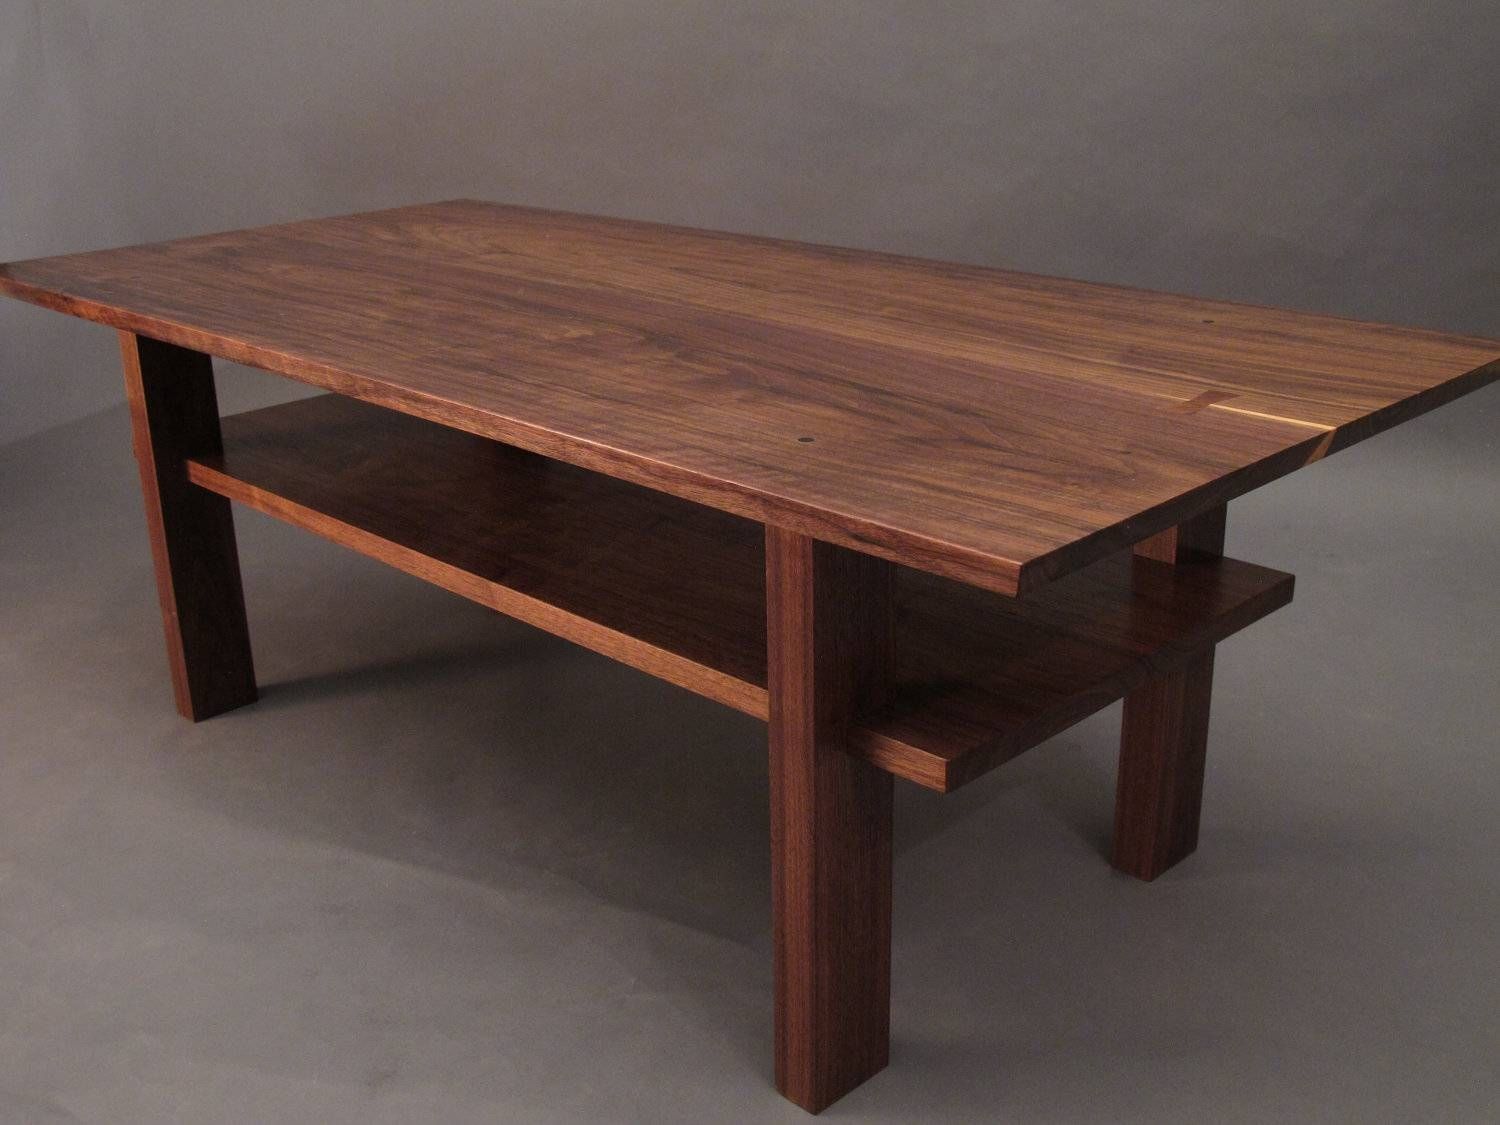 Walnut Coffee Table Small Wood Tables For Living Room Narrow Regarding Thin Coffee Tables (View 3 of 30)